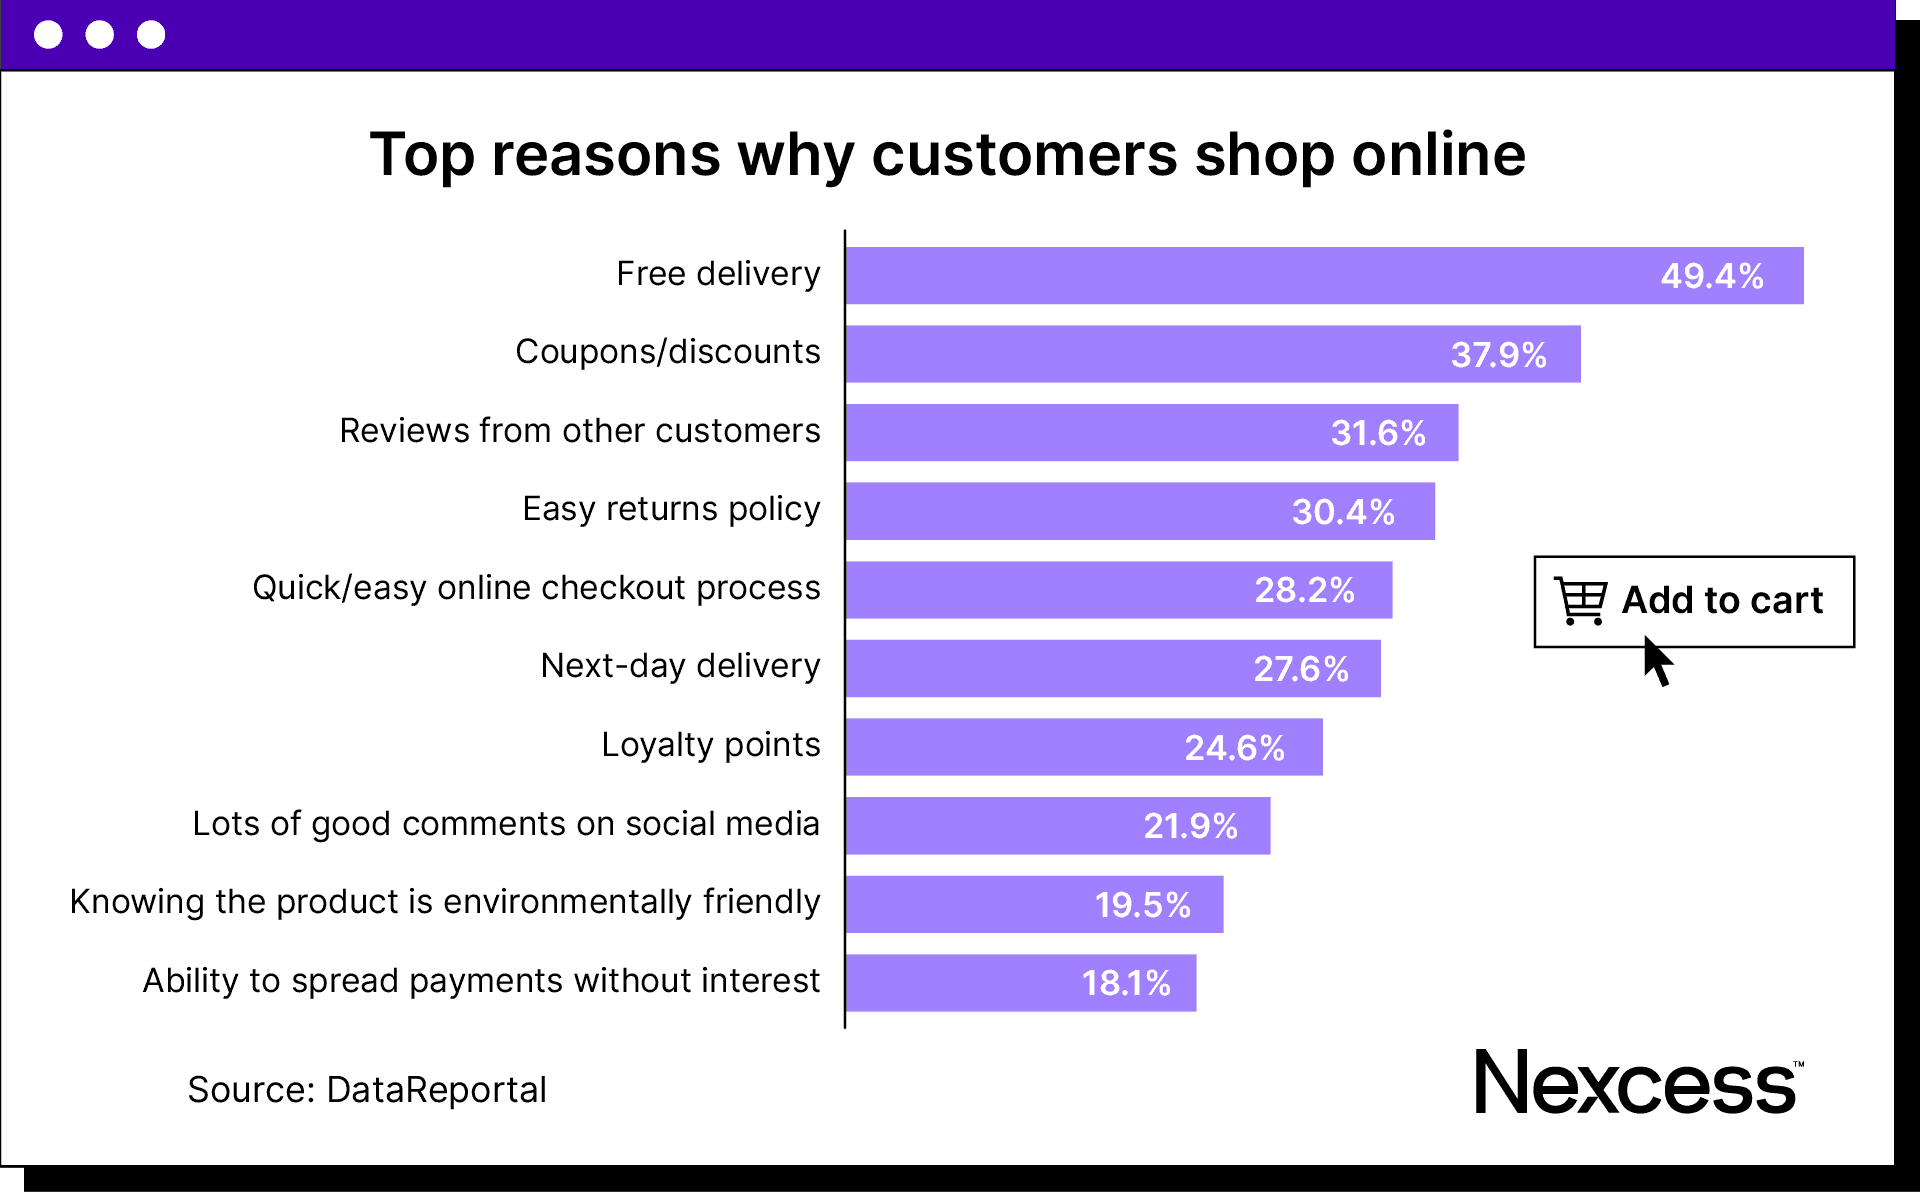 Top reasons why customers shop online.